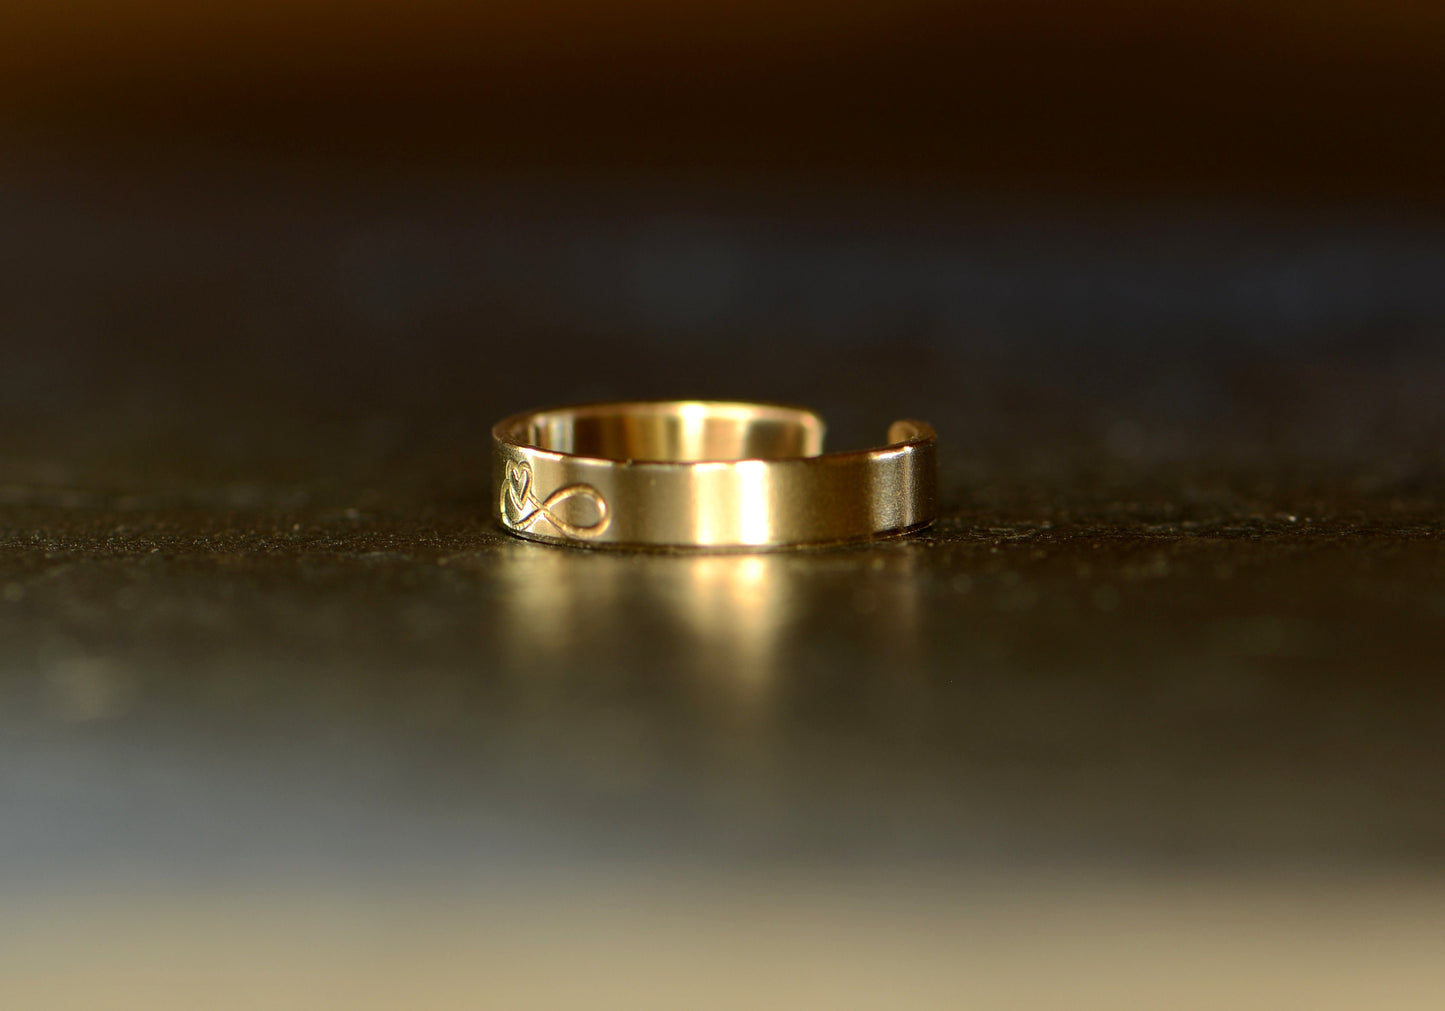 Dainty 14k gold toe ring with infinity and heart - dainty and solid gold